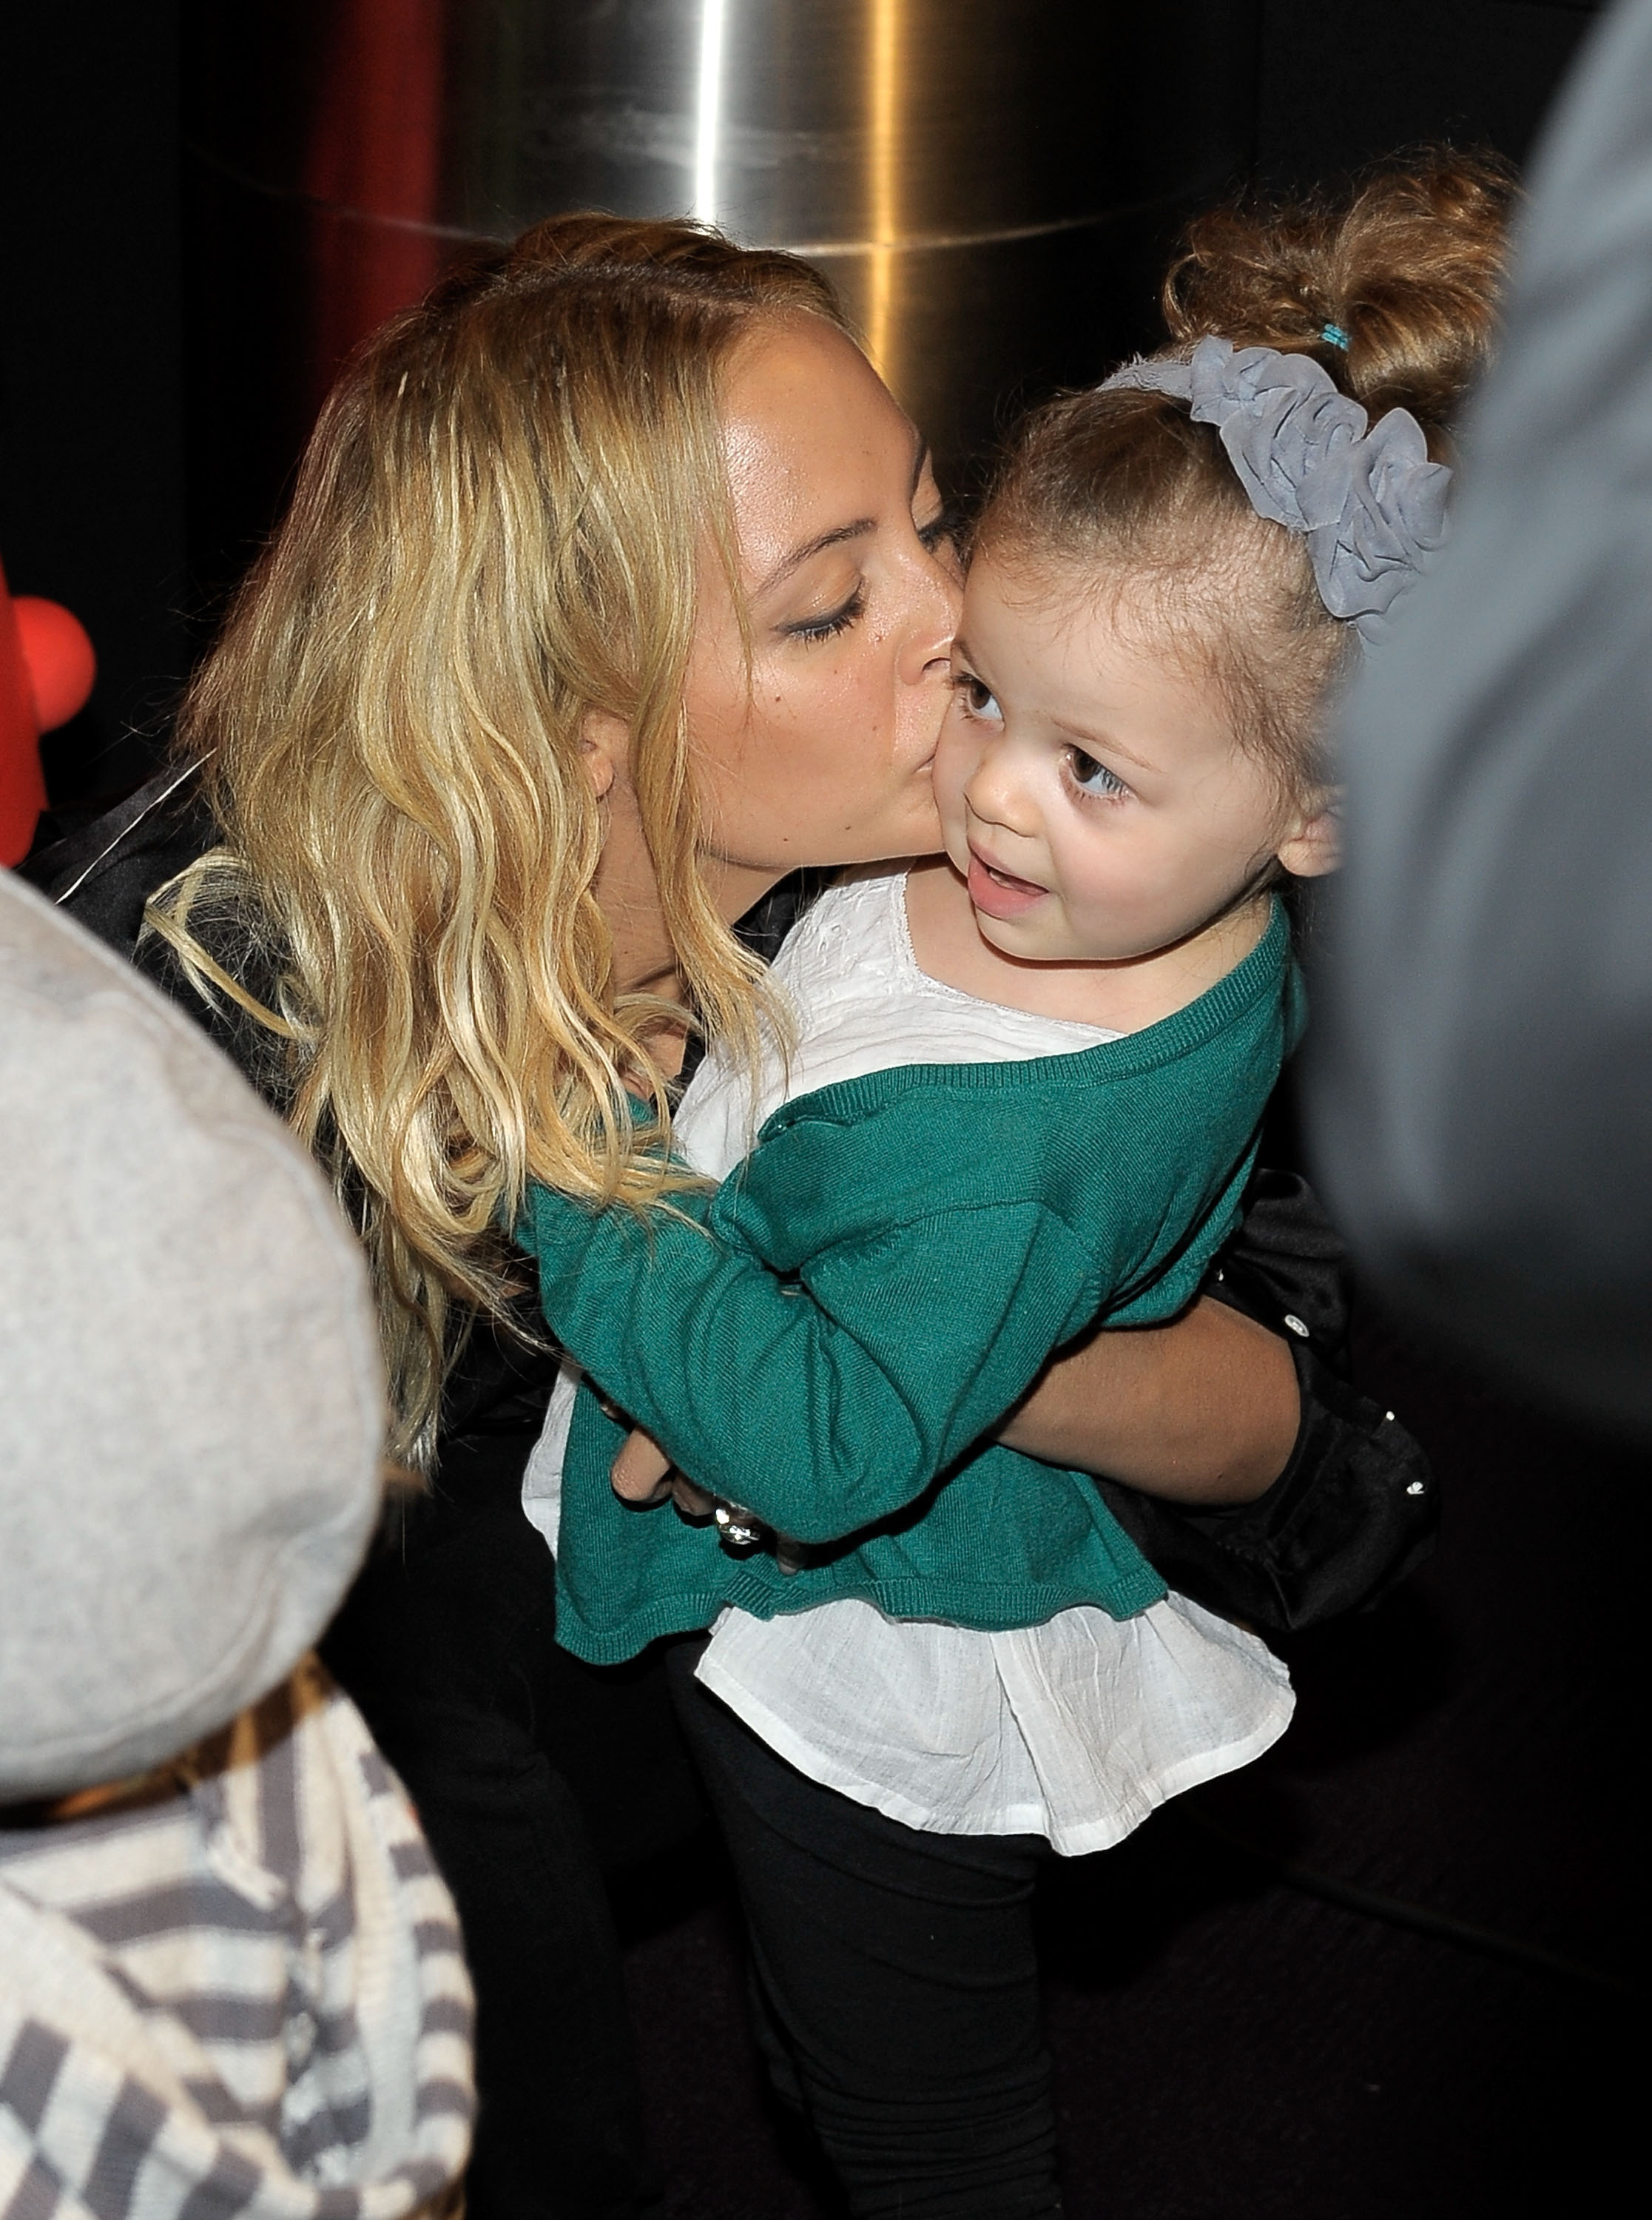 Nicole Richie and Harlow Madden at the "Yo Gabba Gabba!" Live! There's A Party In My City! event in Los Angeles, California on November 27, 2010 | Source: Getty Images